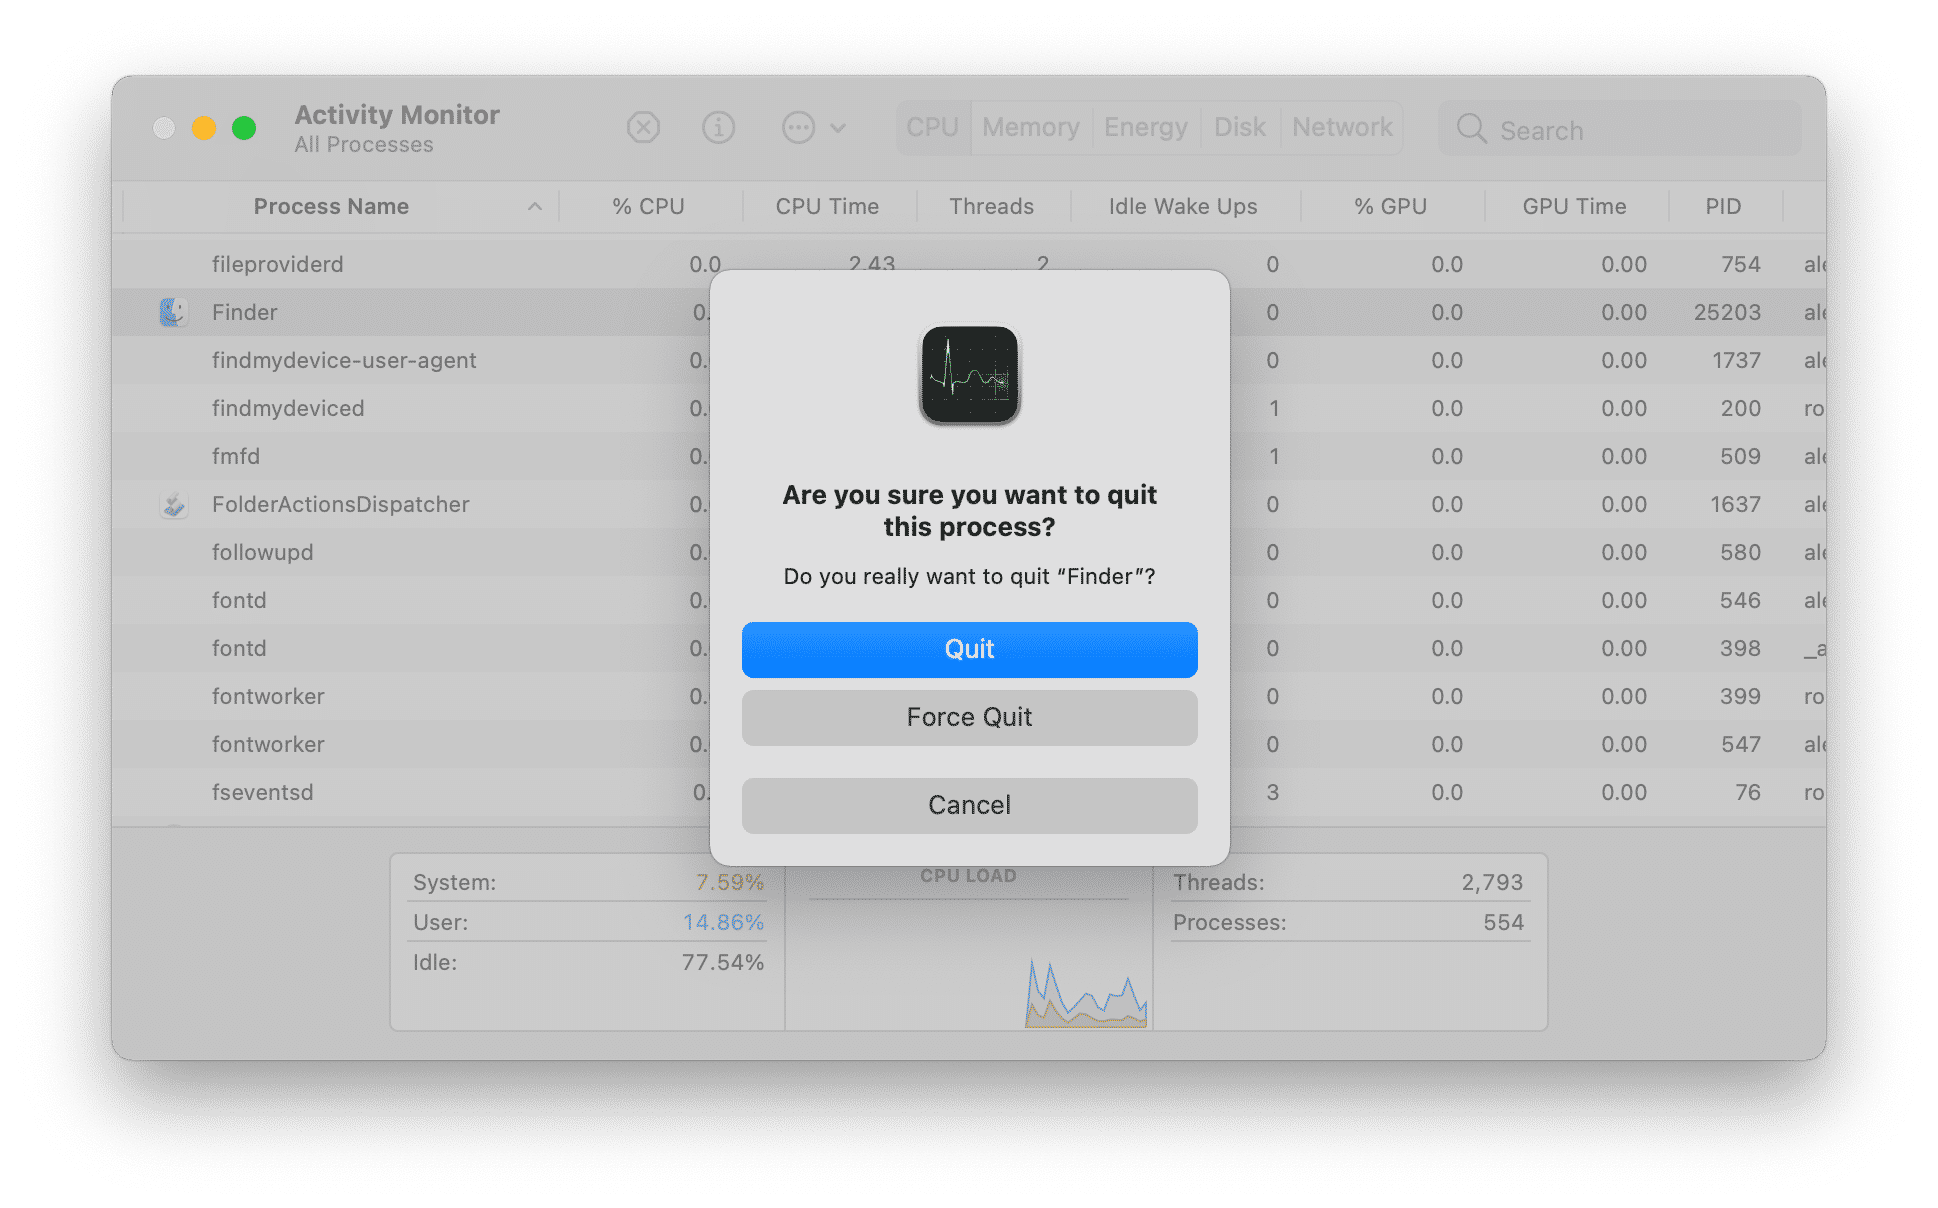 Activity Monitor window with popup message asking to quit Finder